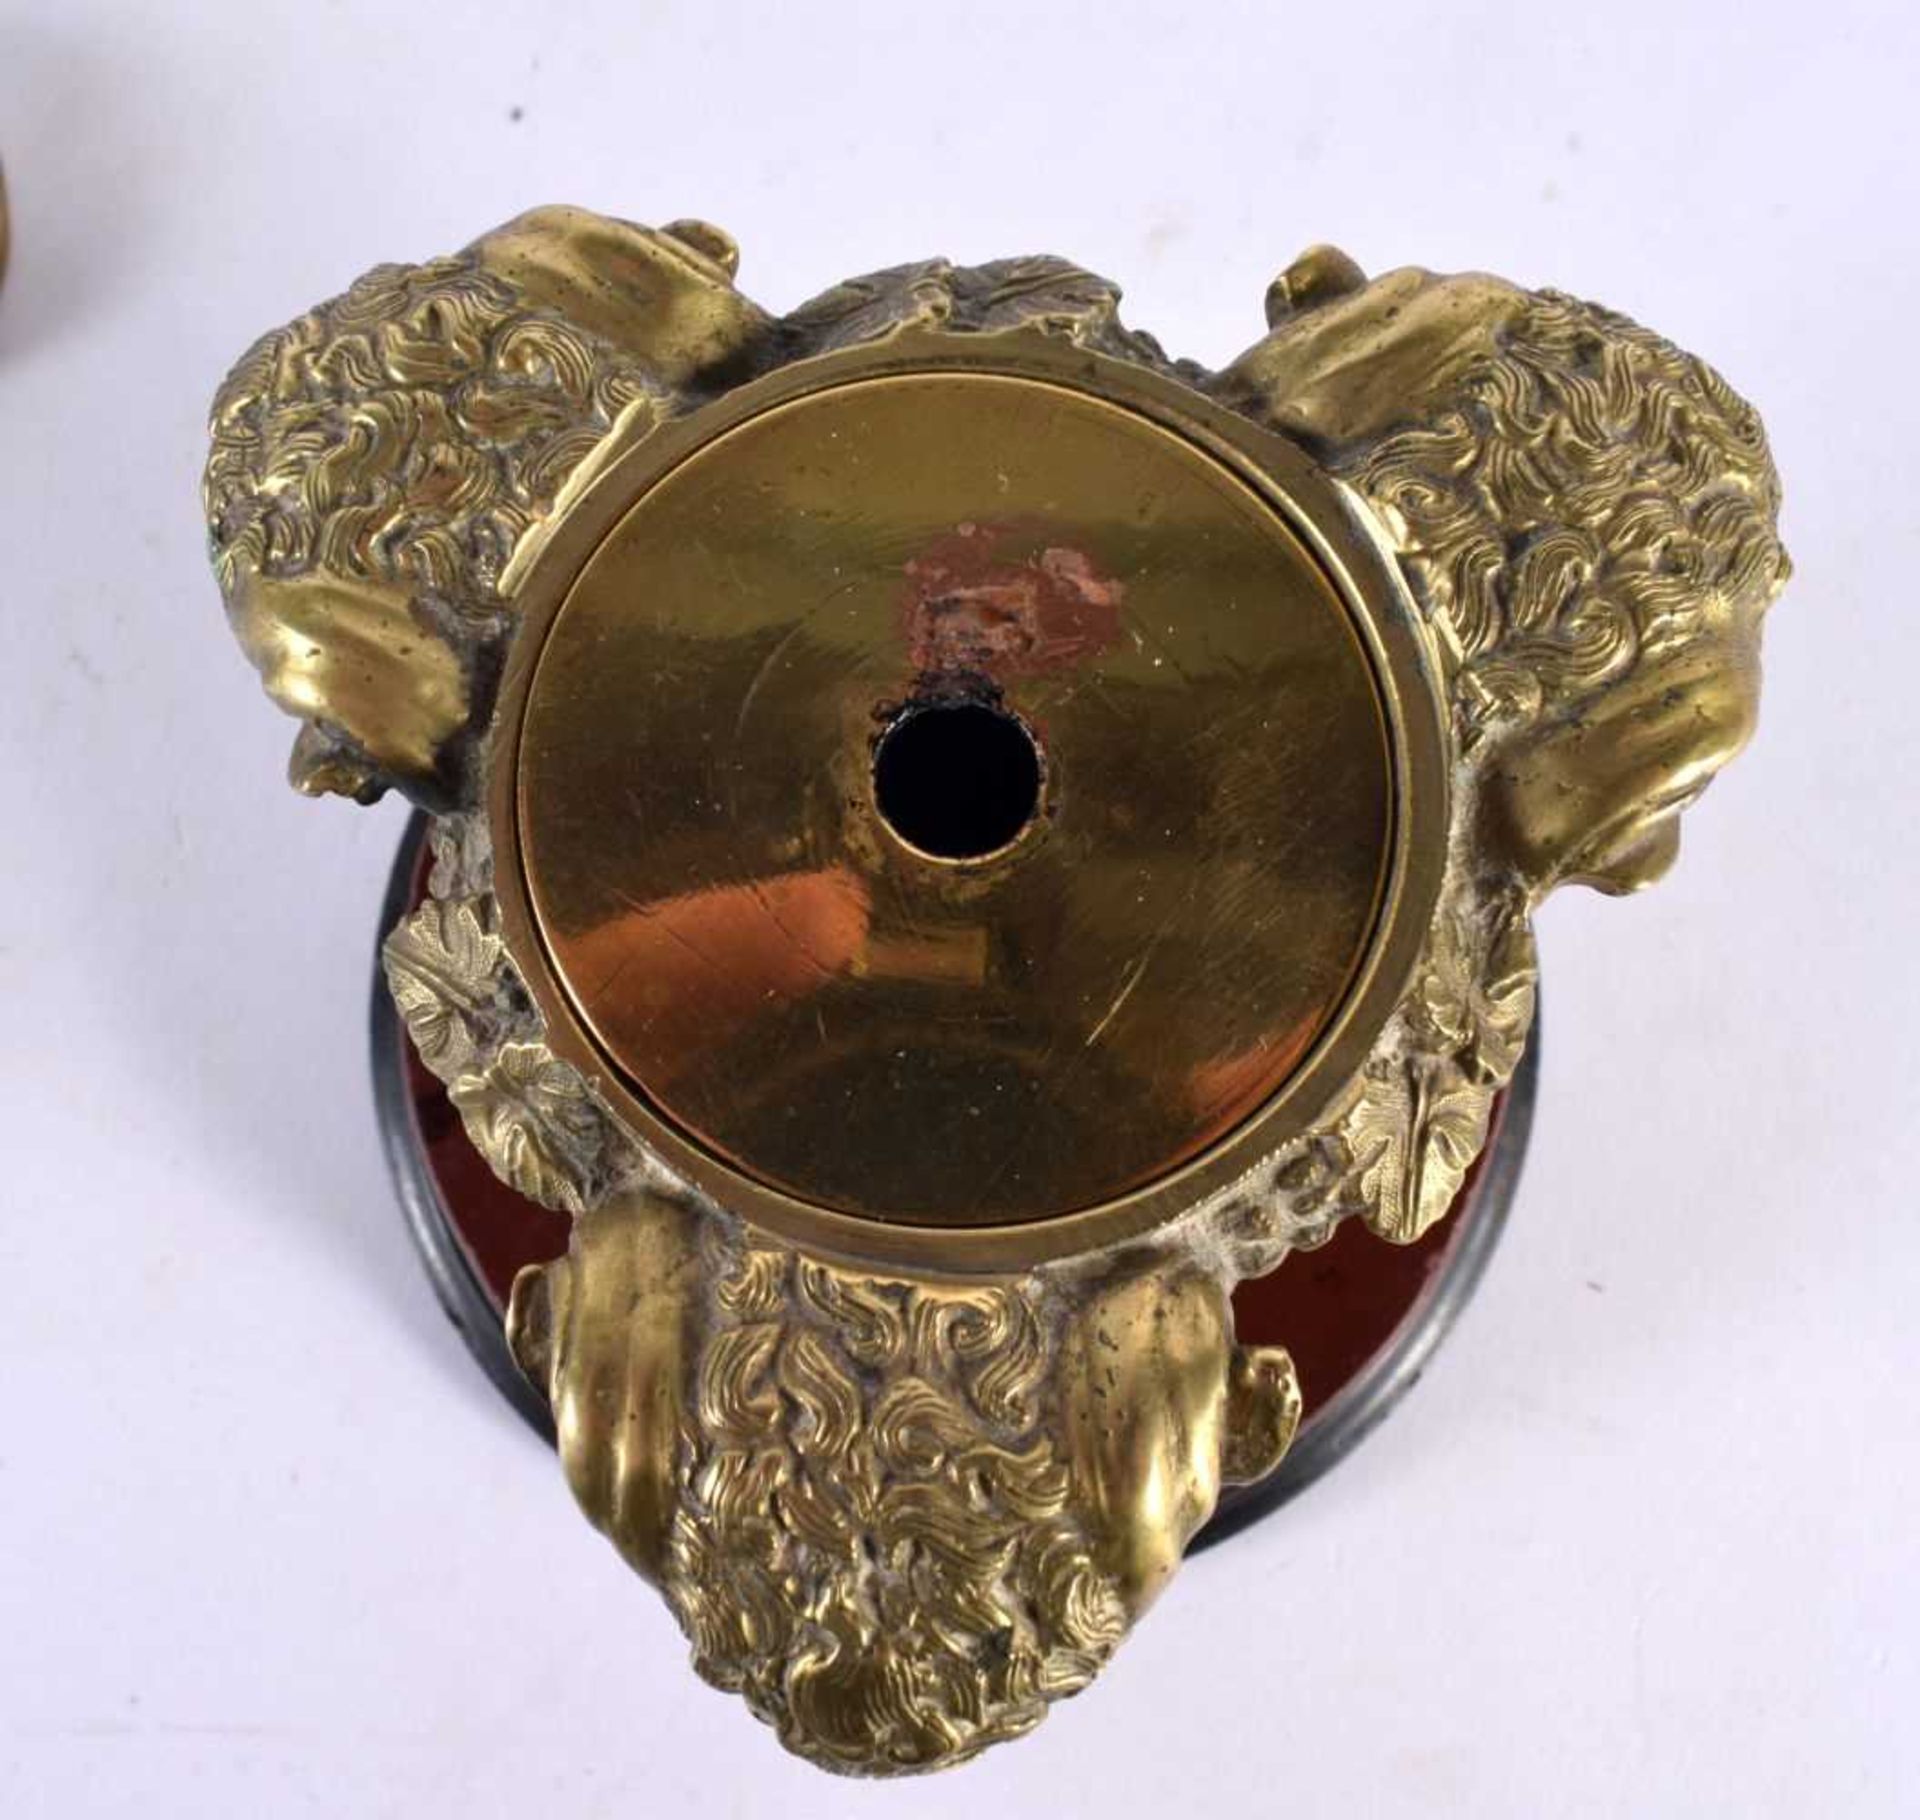 A FINE 19TH CENTURY EUROPEAN GRAND TOUR BRONZE INKWELL AND COVER upon a red marble base, formed with - Image 8 of 10